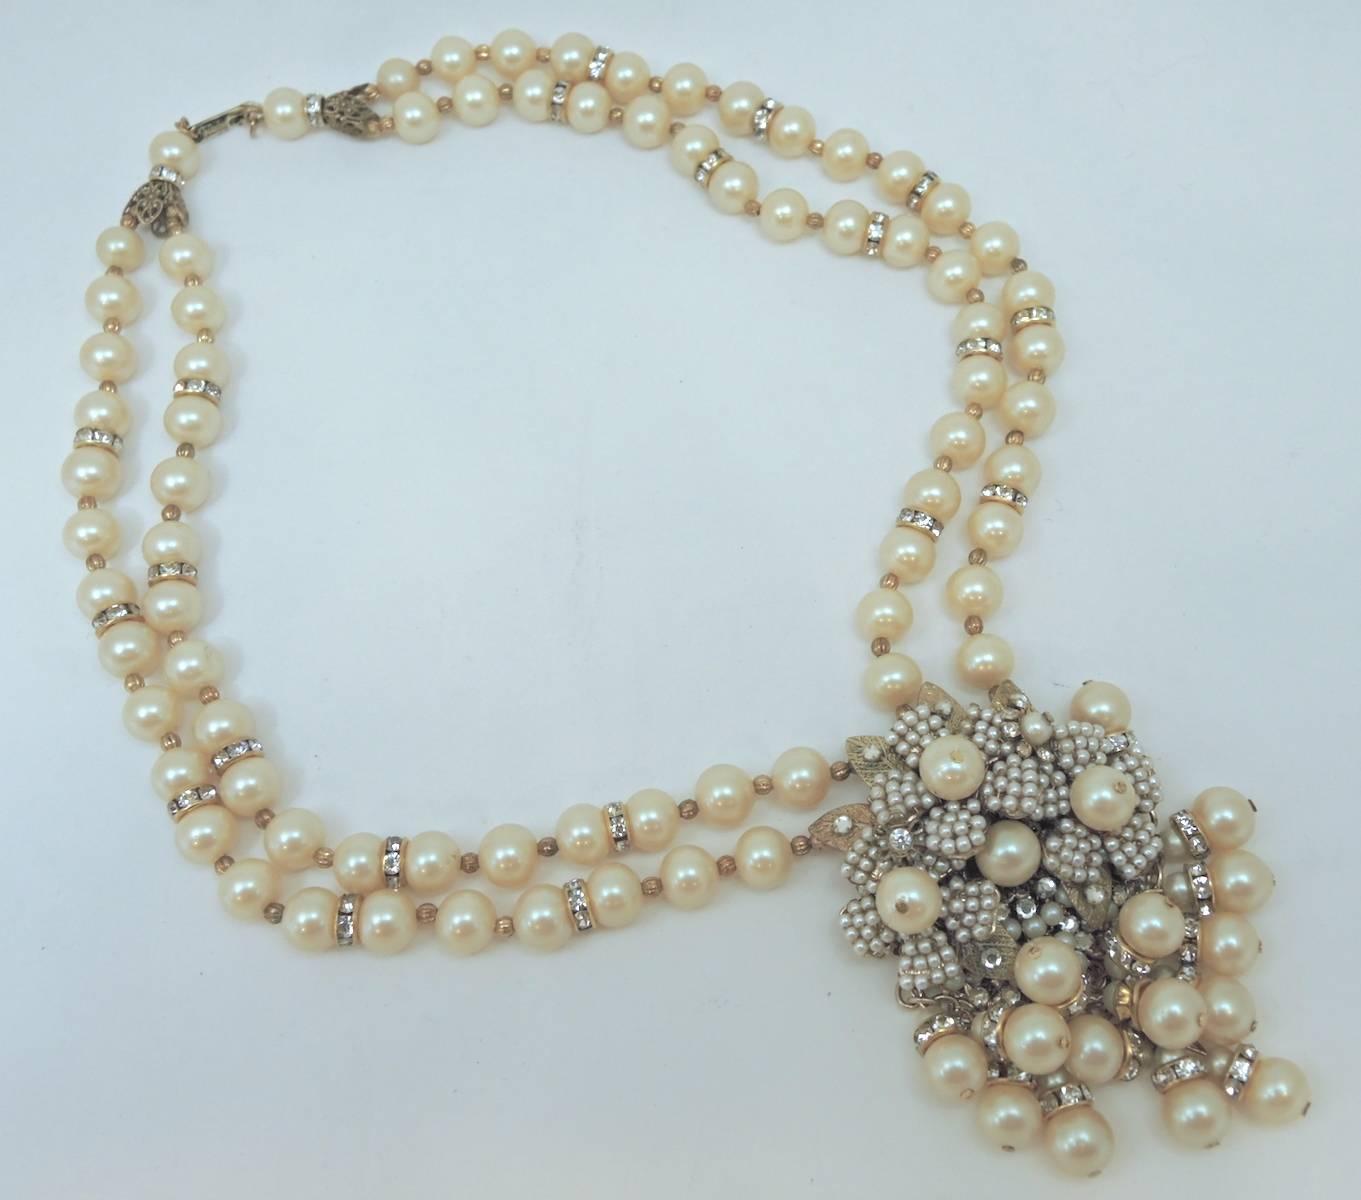 Women's Vintage Miriam Haskell Double Strand Floral Faux Pearl Necklace